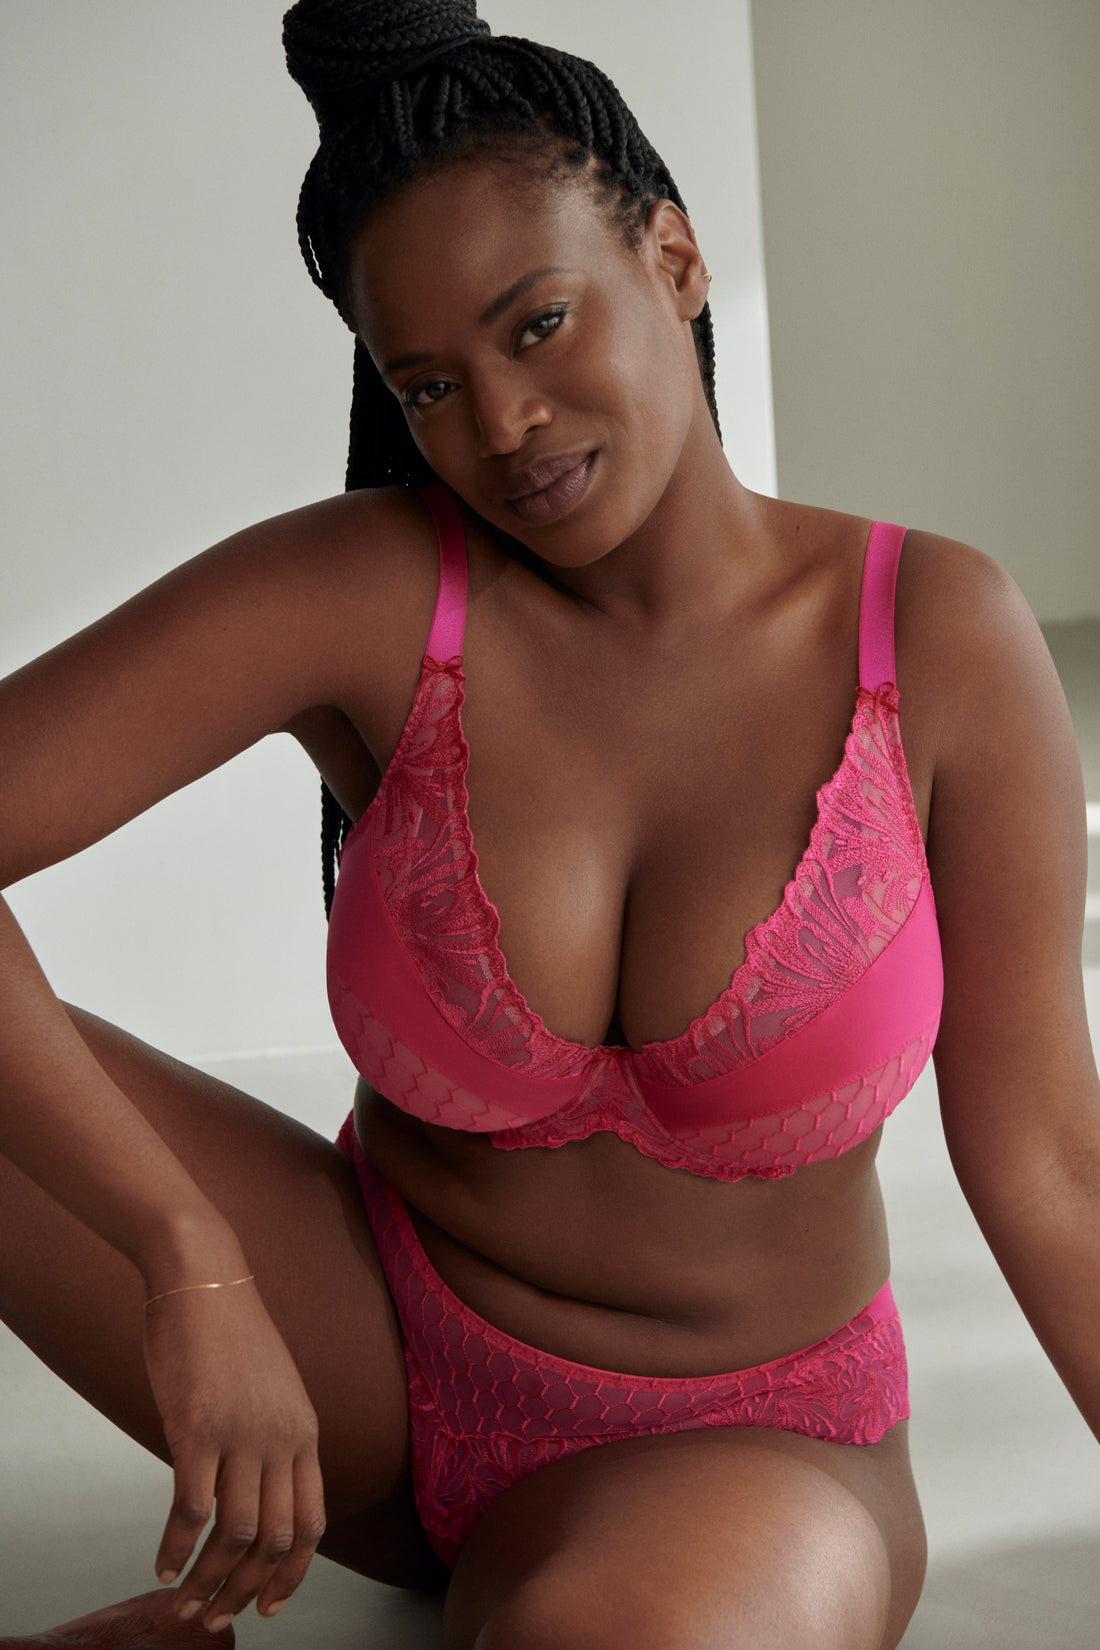 The Top 6 Reasons PrimaDonna Bras Fit So Well